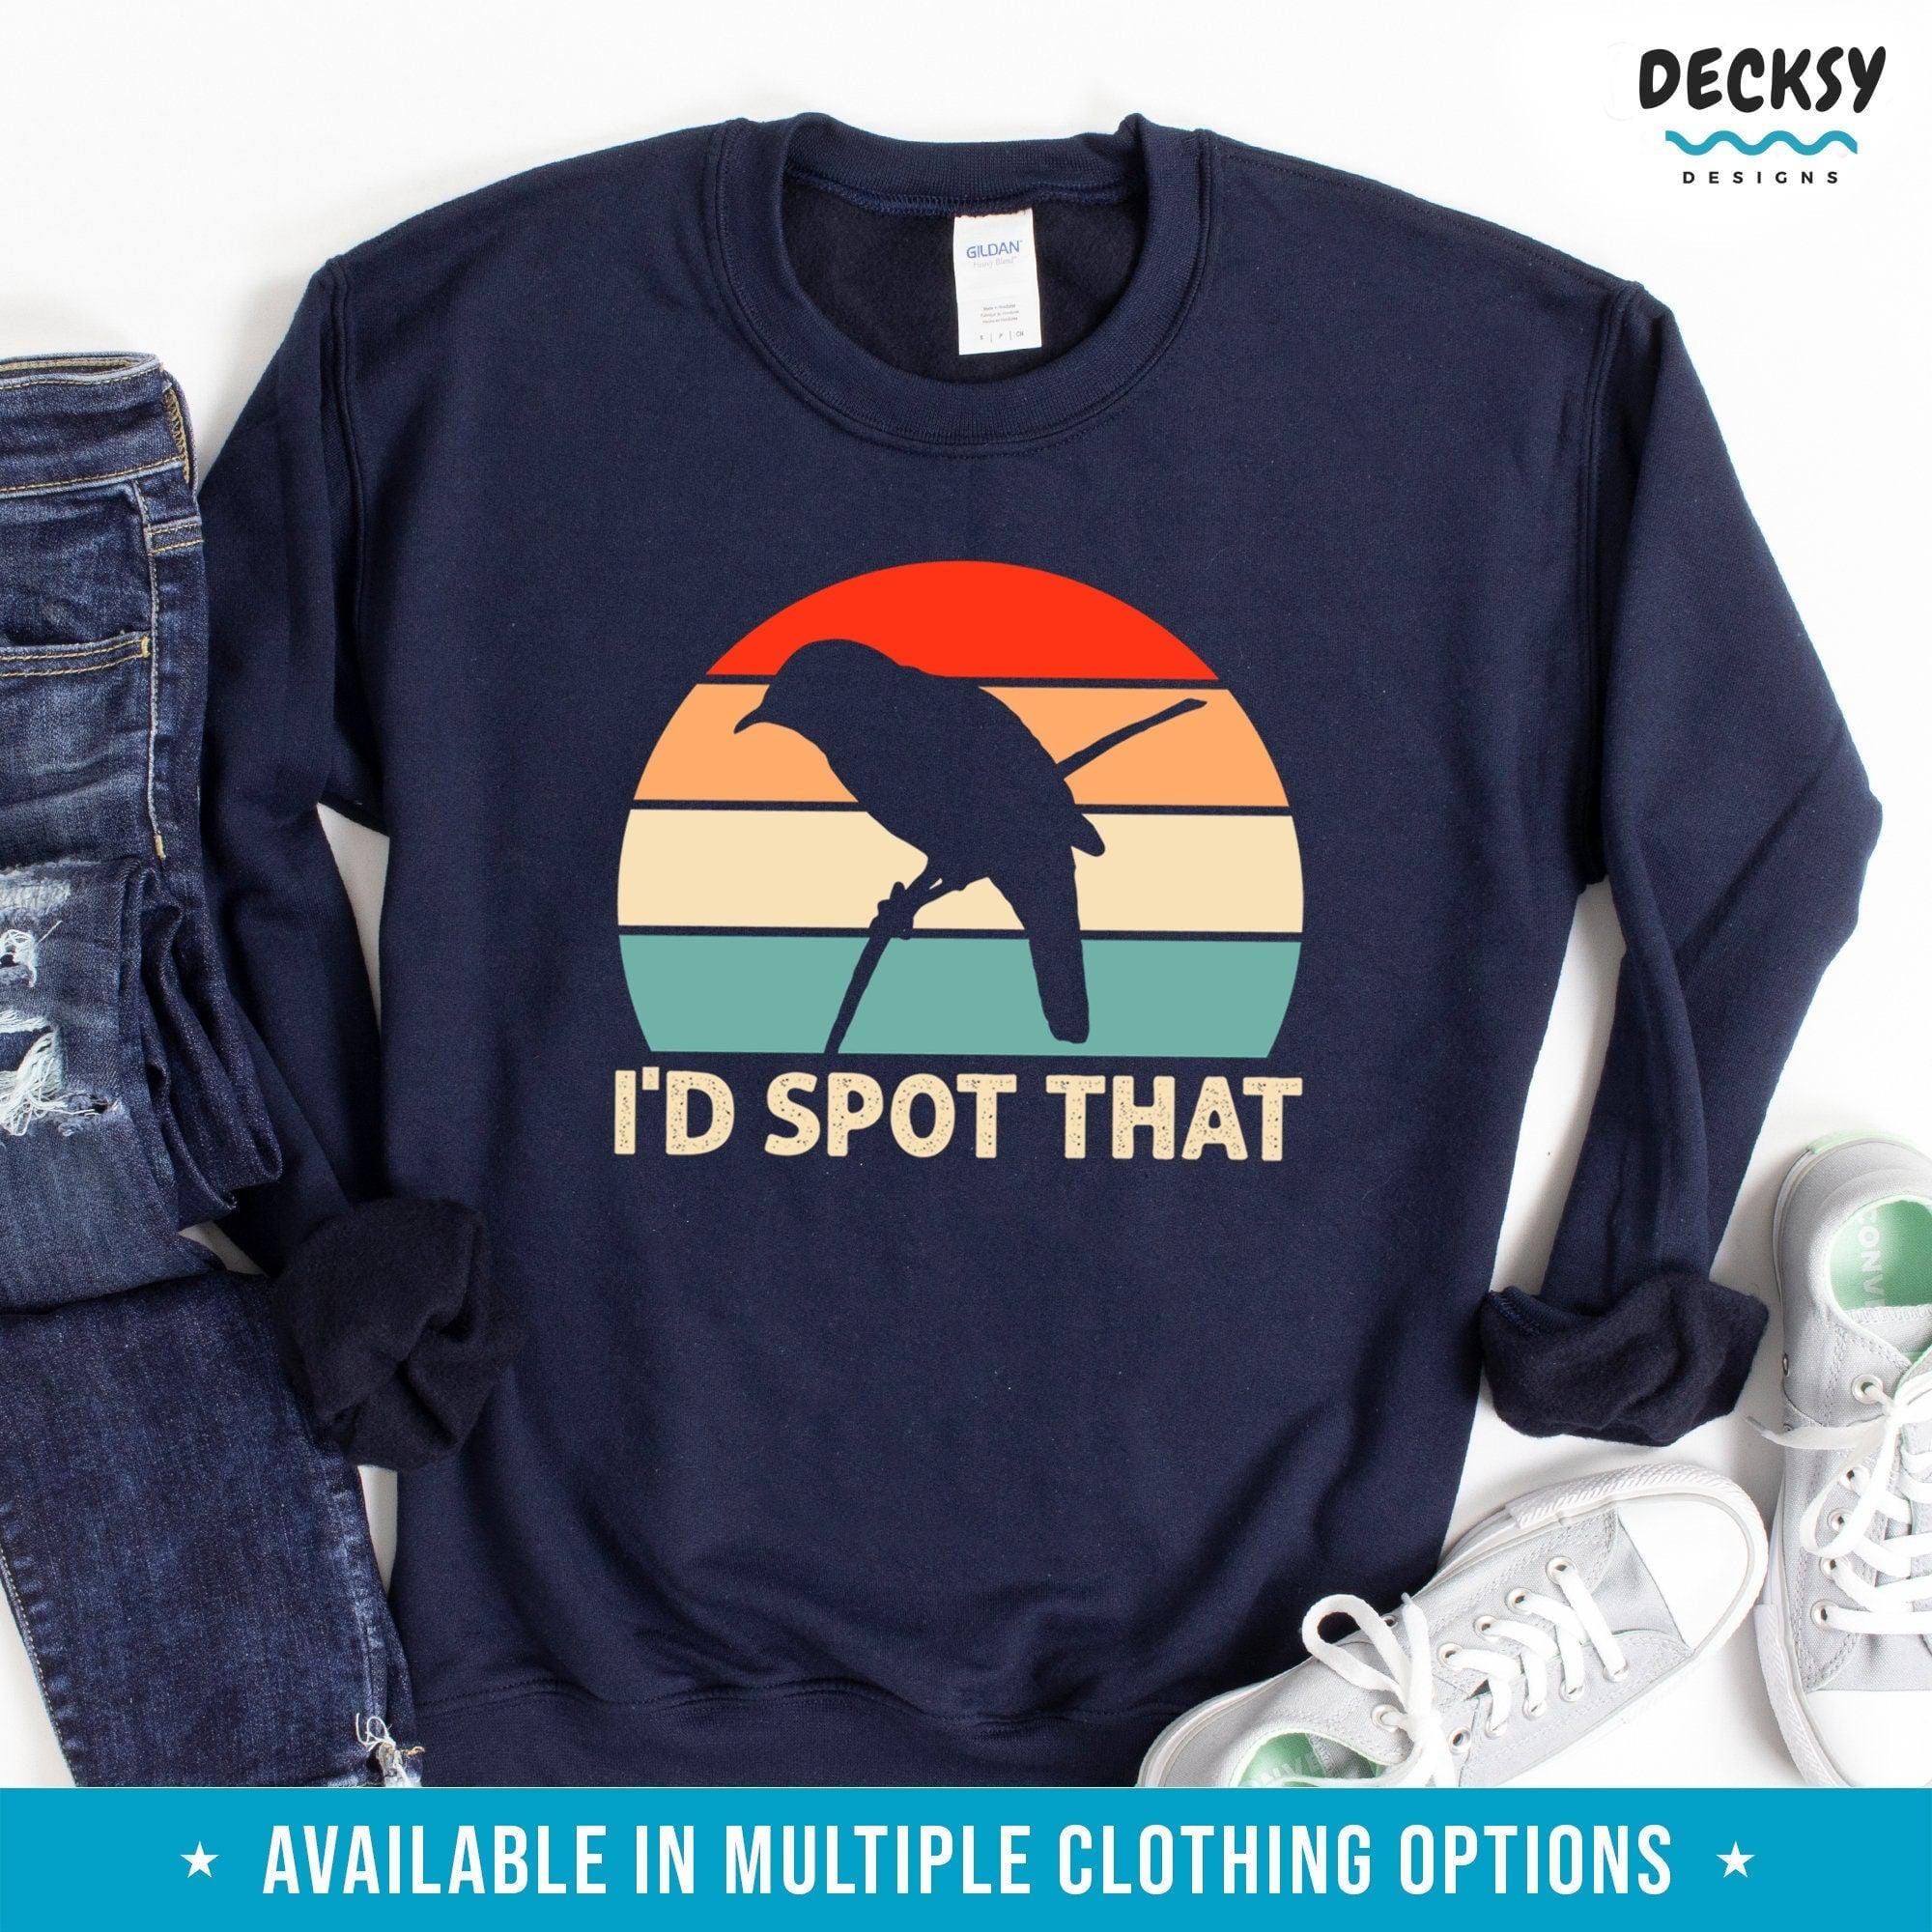 Birdwatching Shirt, Bird Lover Gift-Clothing:Gender-Neutral Adult Clothing:Tops & Tees:T-shirts:Graphic Tees-DecksyDesigns